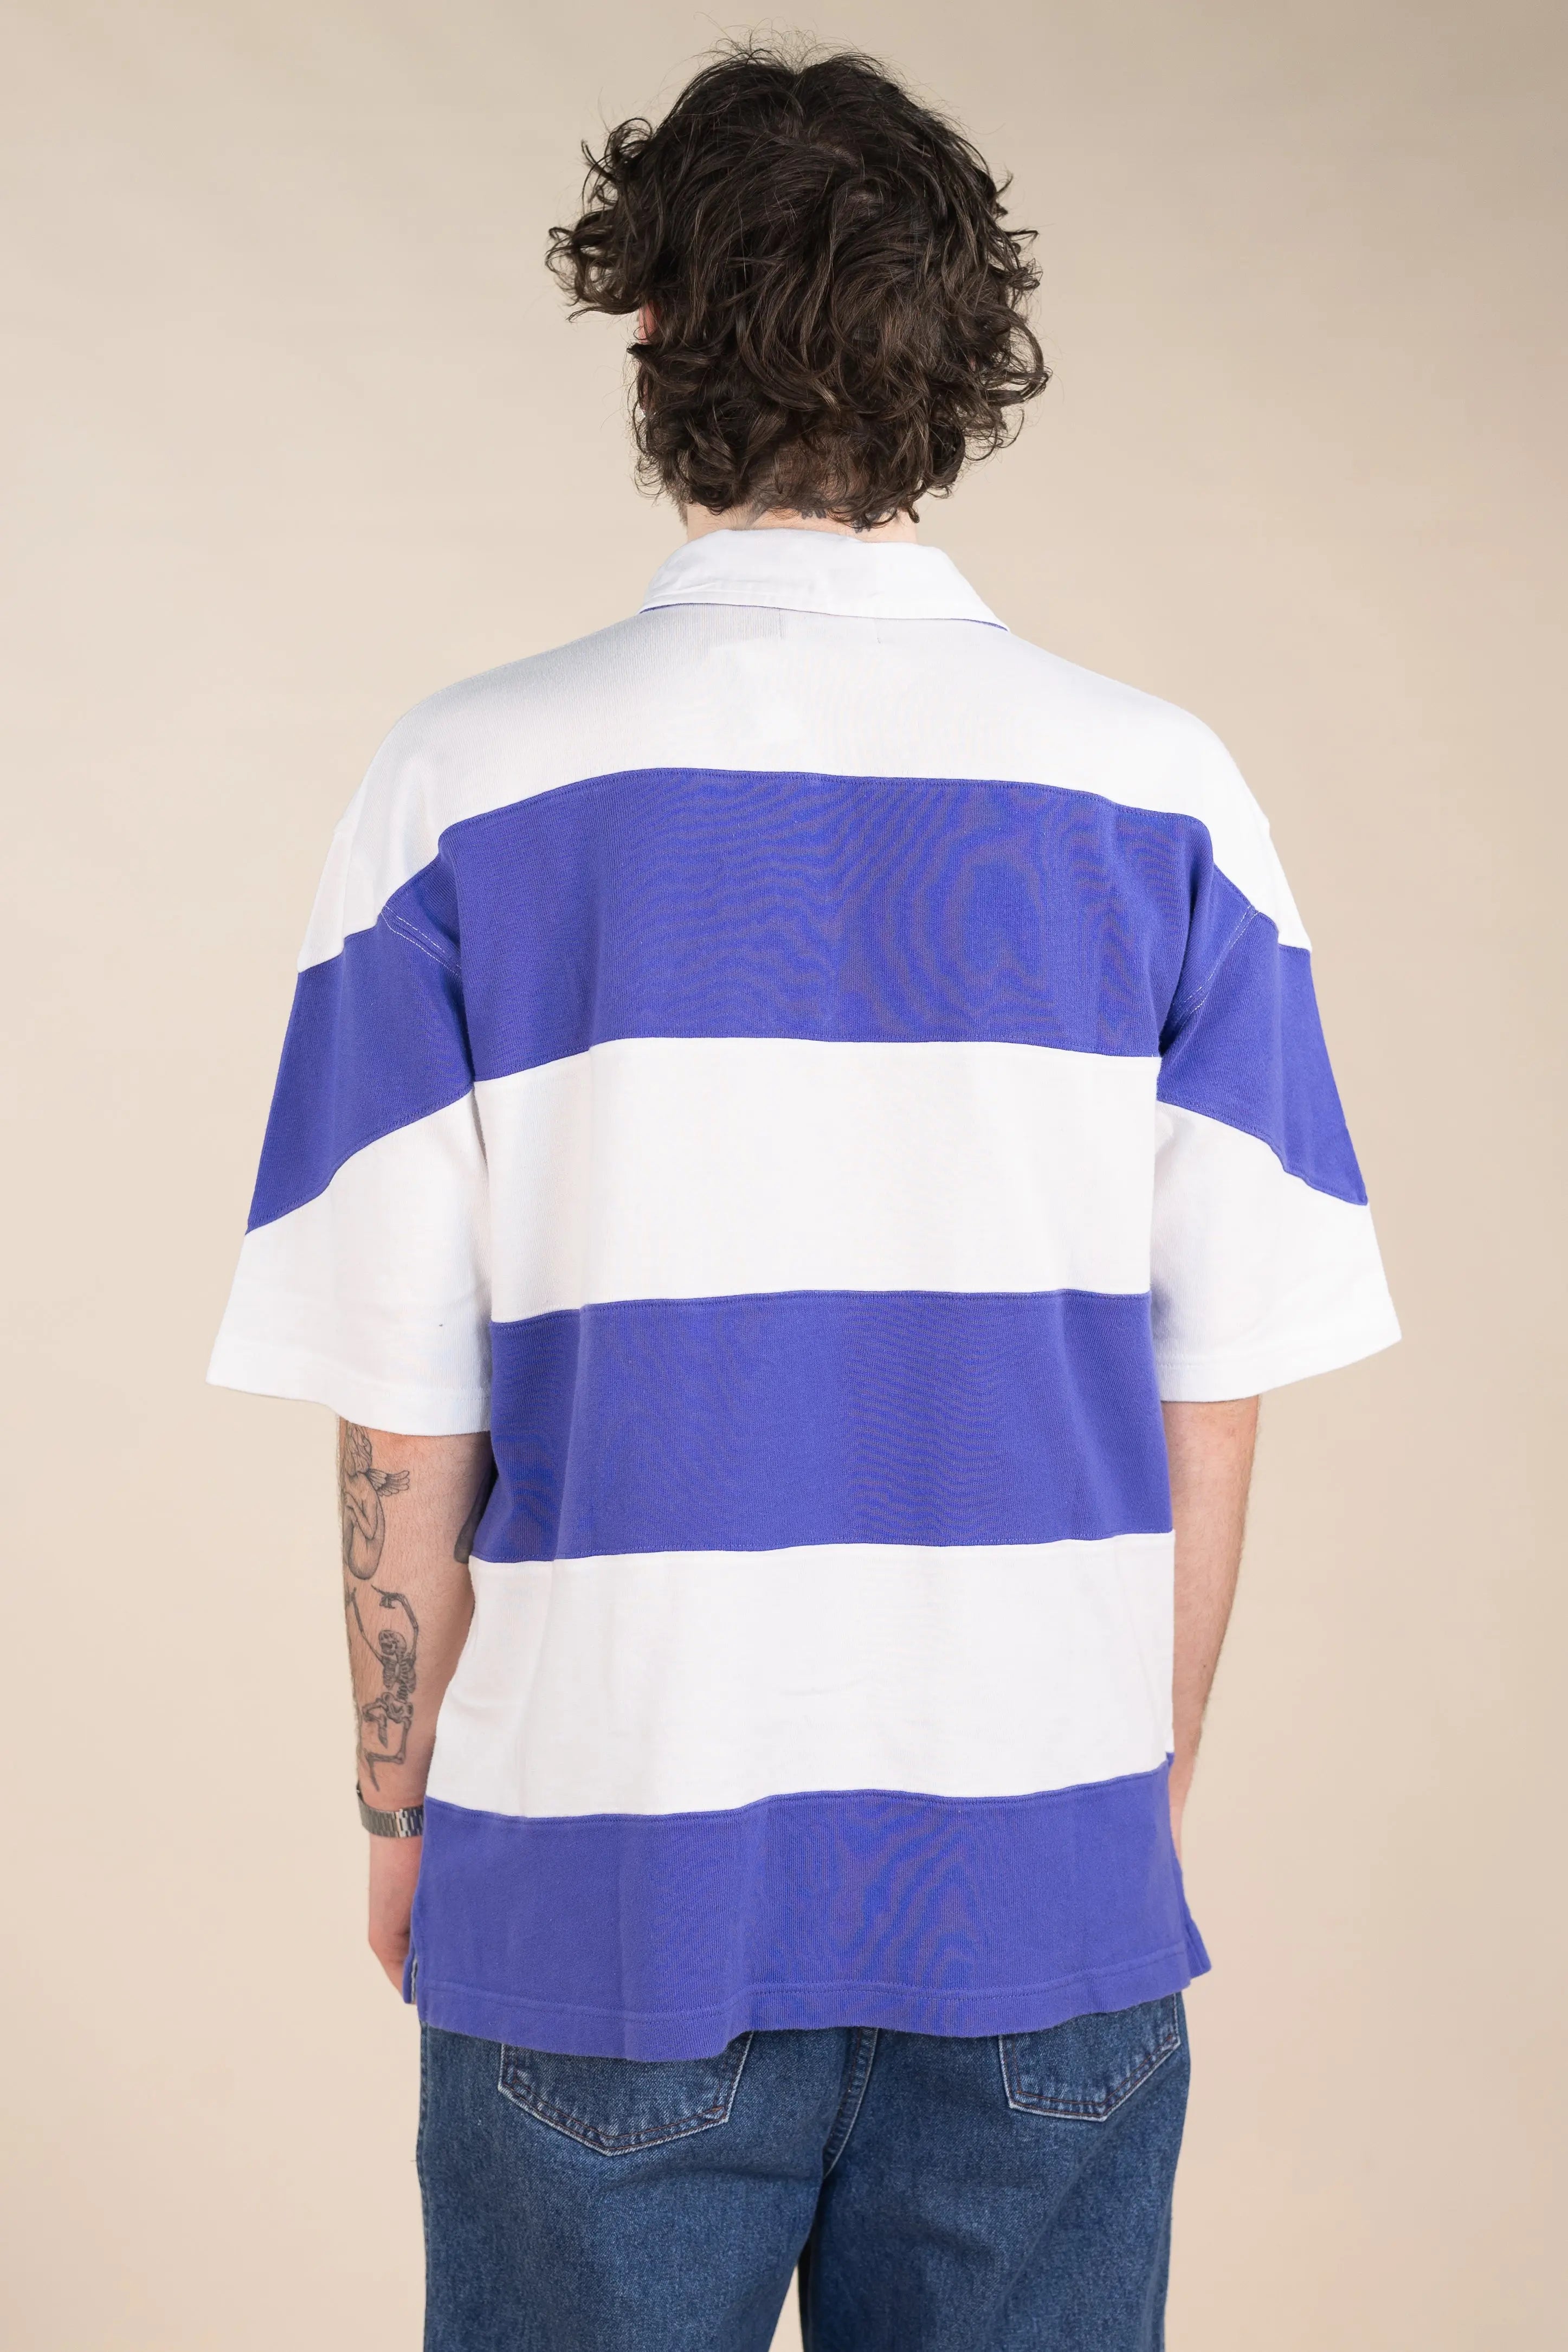 Robe di Kappa - Striped Polo- ThriftTale.com - Vintage and second handclothing